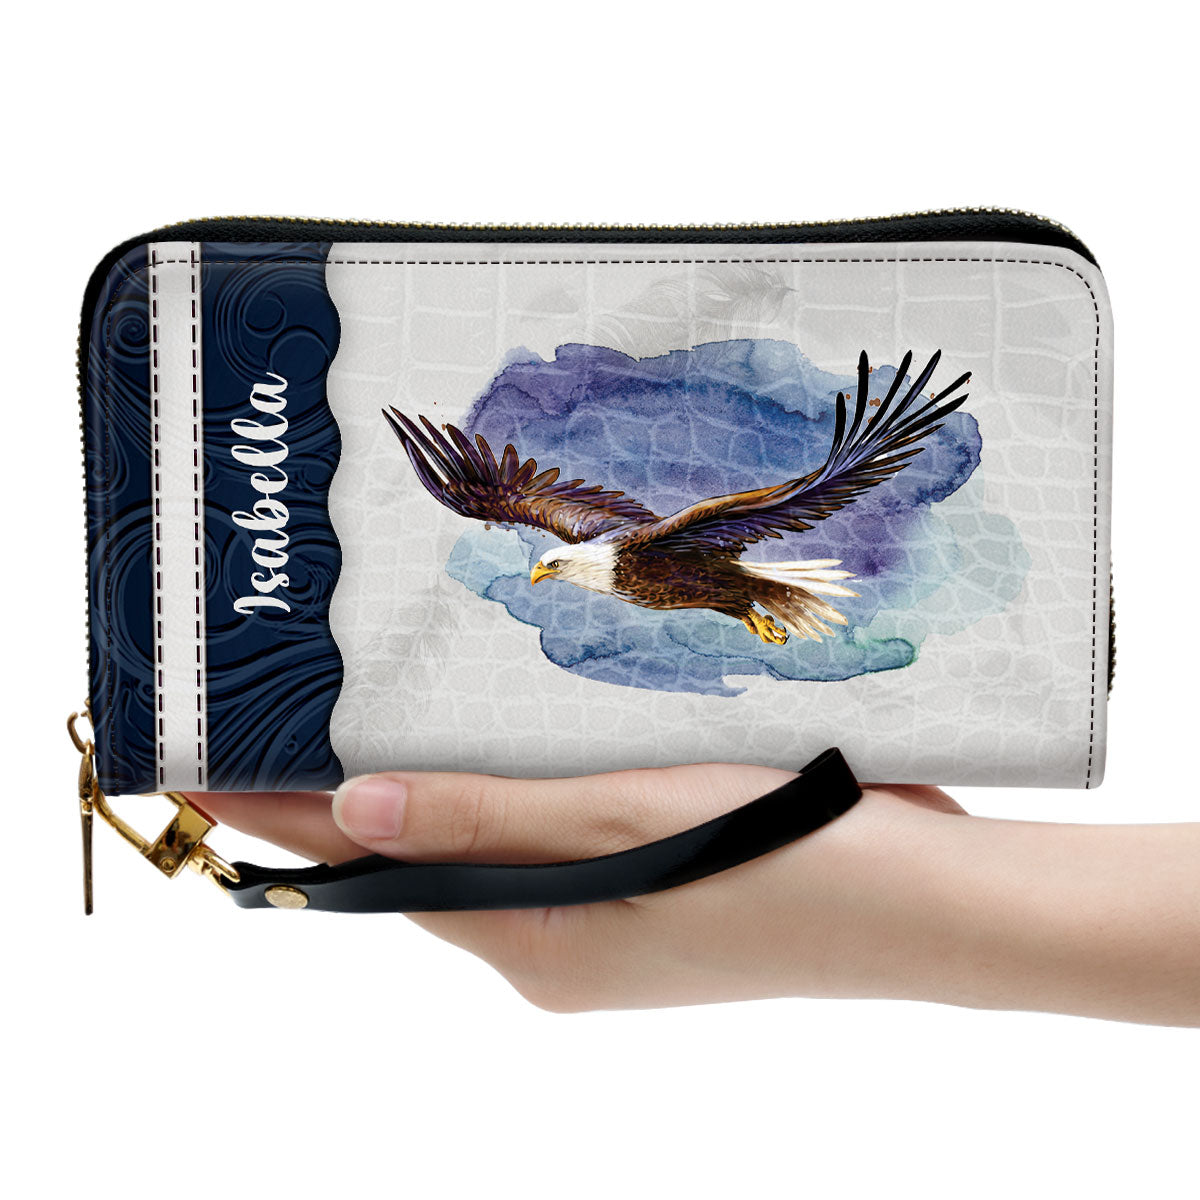 They Will Soar On Wings Like Eagles Christ Gifts For Women Of God Isaiah 4031 Clutch Purse For Women - Personalized Name - Christian Gifts For Women